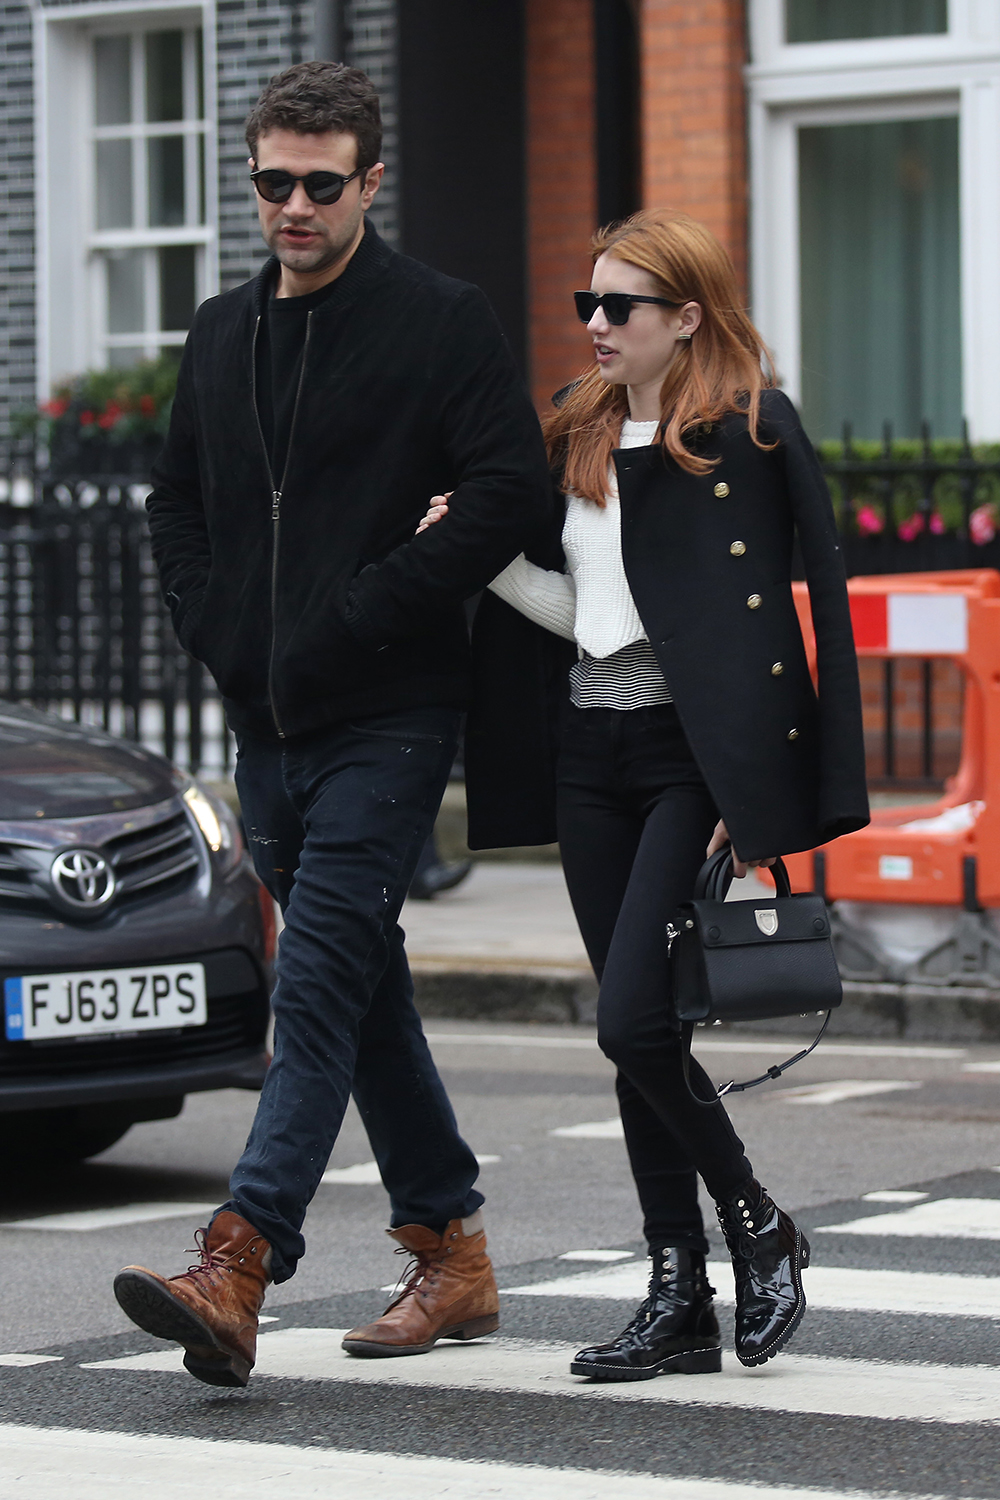 Emma Roberts keeps things chic in black and white while out and about with a friend in Mayfair, London.